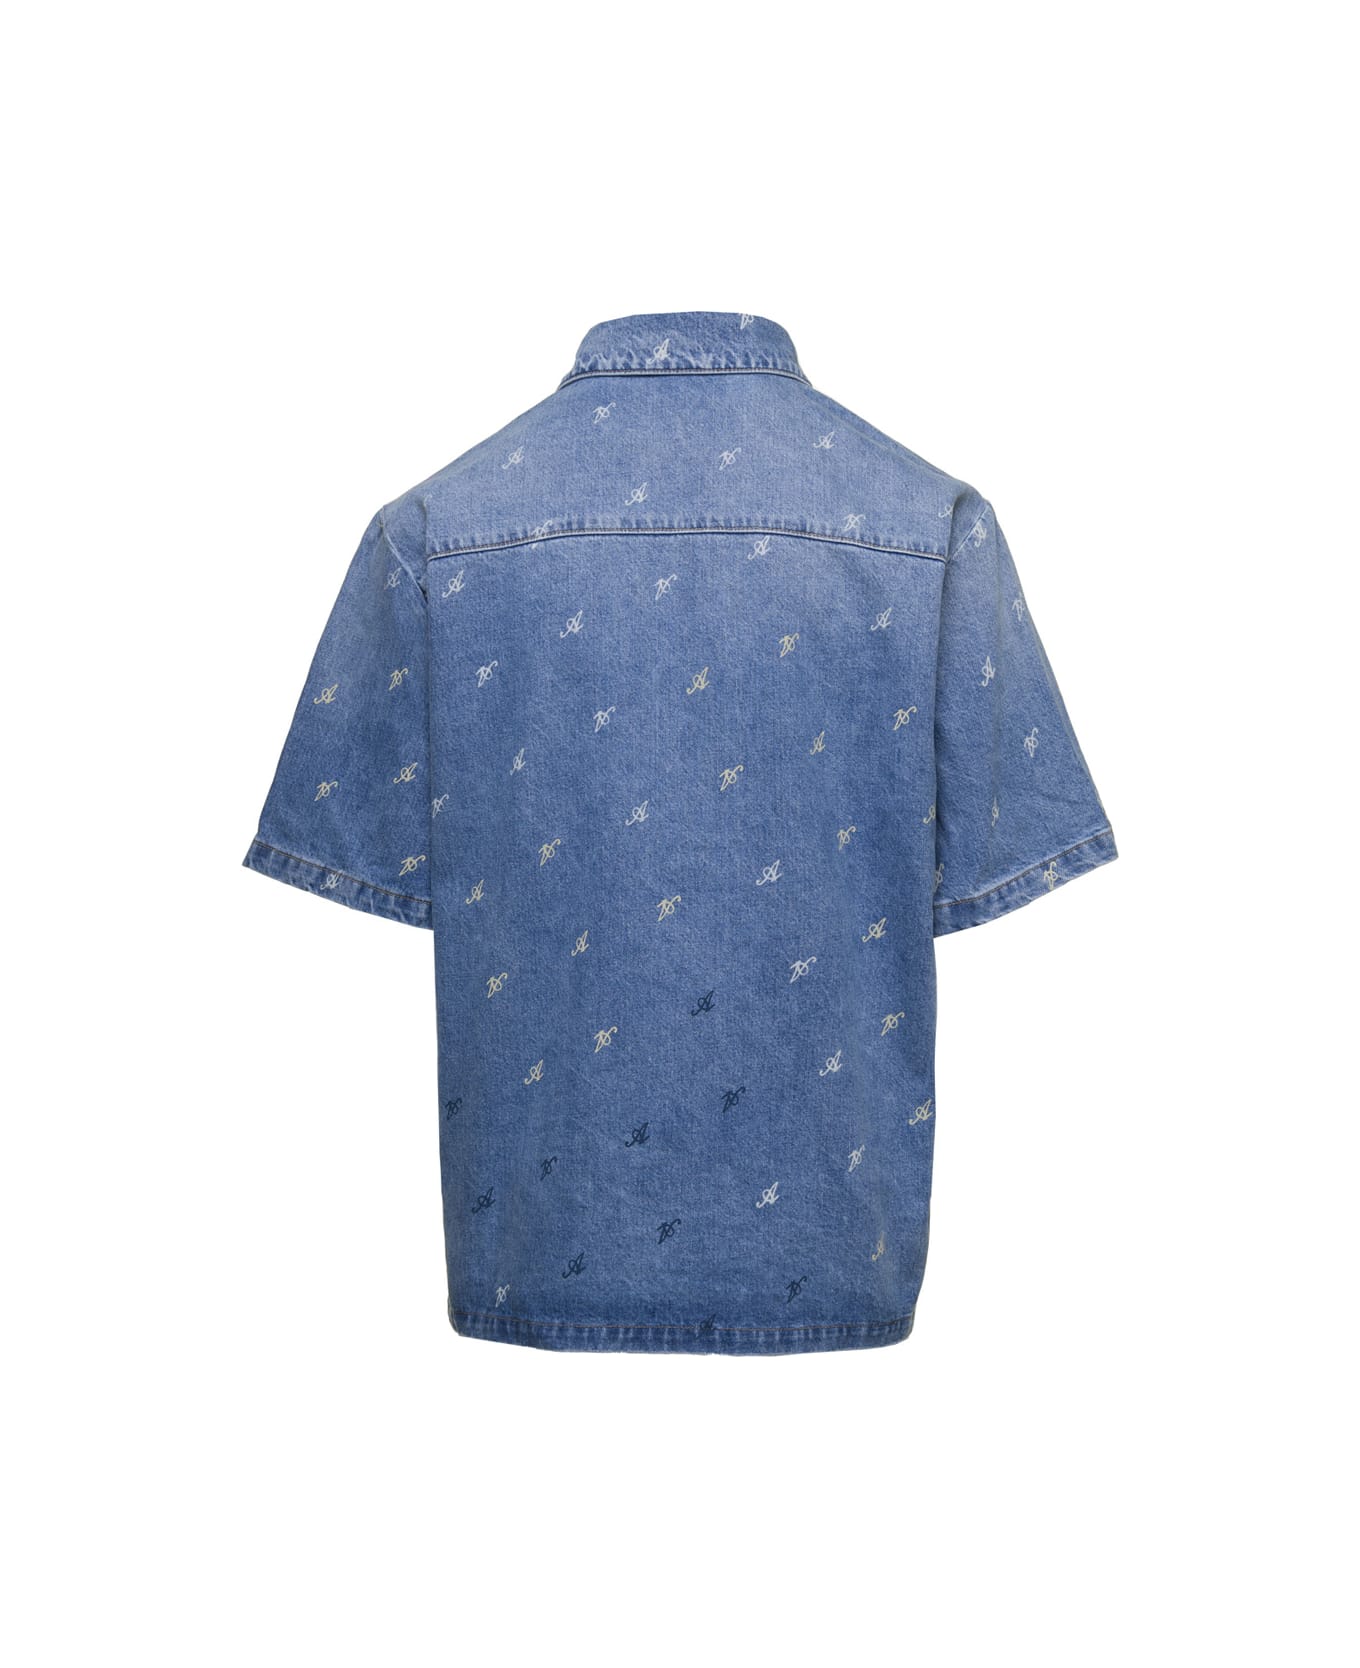 Axel Arigato Blue Jeans Shirt With Logo All Over In Denim Man - Blu シャツ